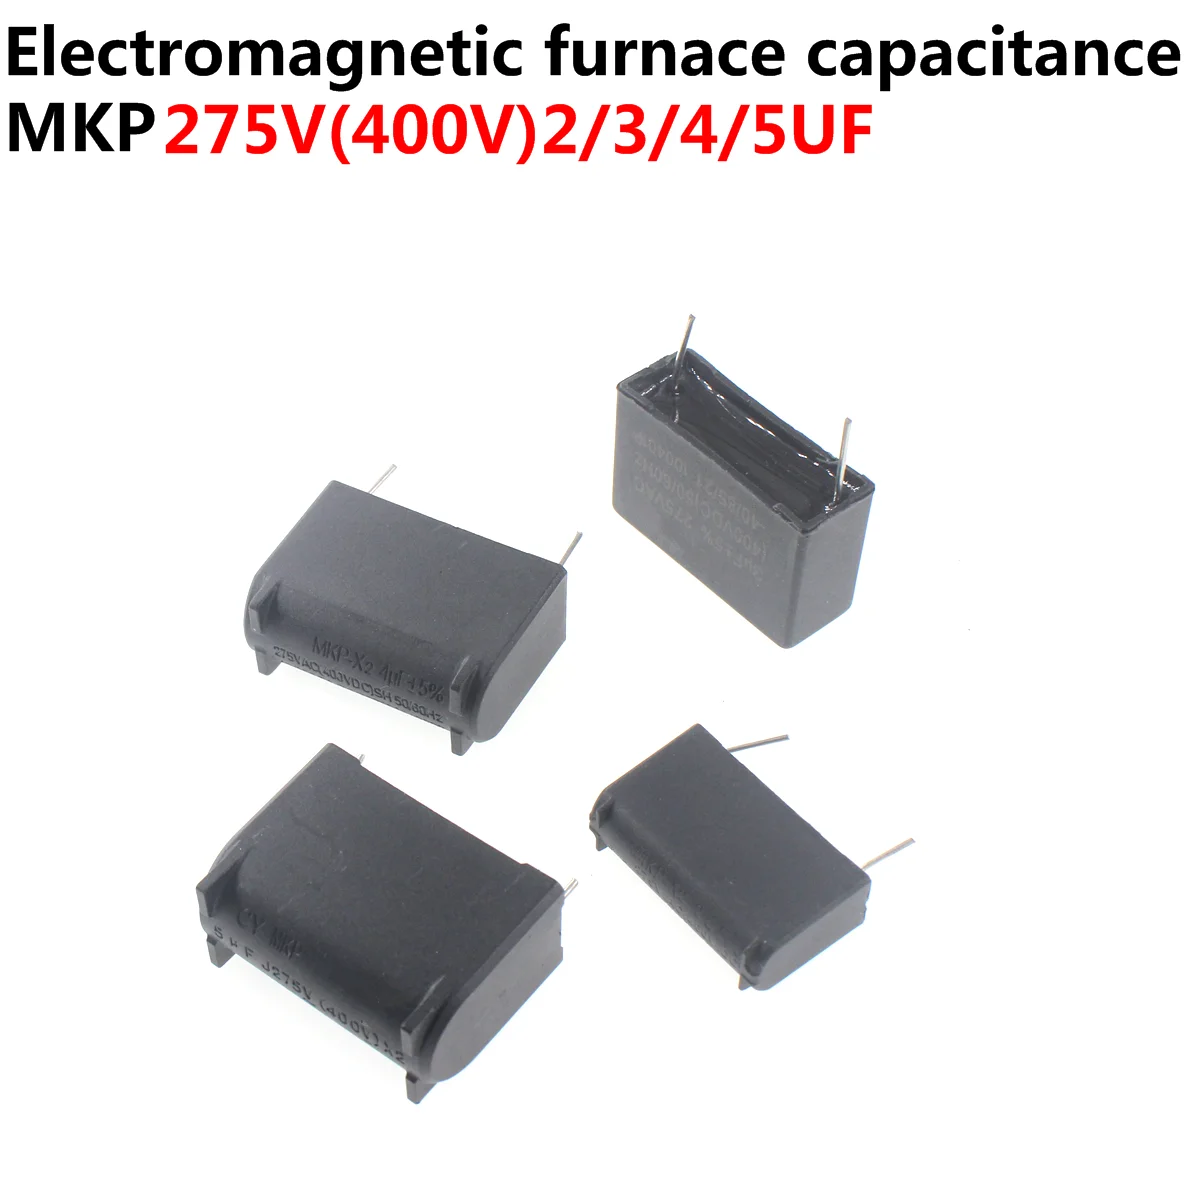 2pcs MKP X2 5UF 4UF 3.3UF 3UF 2UF(Thickness9mm/12mm) Needle pitch:26.5mm/31mm 275V AC 400V DC Vertical Induction Capacitor 2pcs or 10pcs hf0306 hf0406 hf0608 hf0612 ewc0608 one way needle roller bearing 3 6 5 6mm 4 8 6mm 6 10 8mm 6 10 12mm